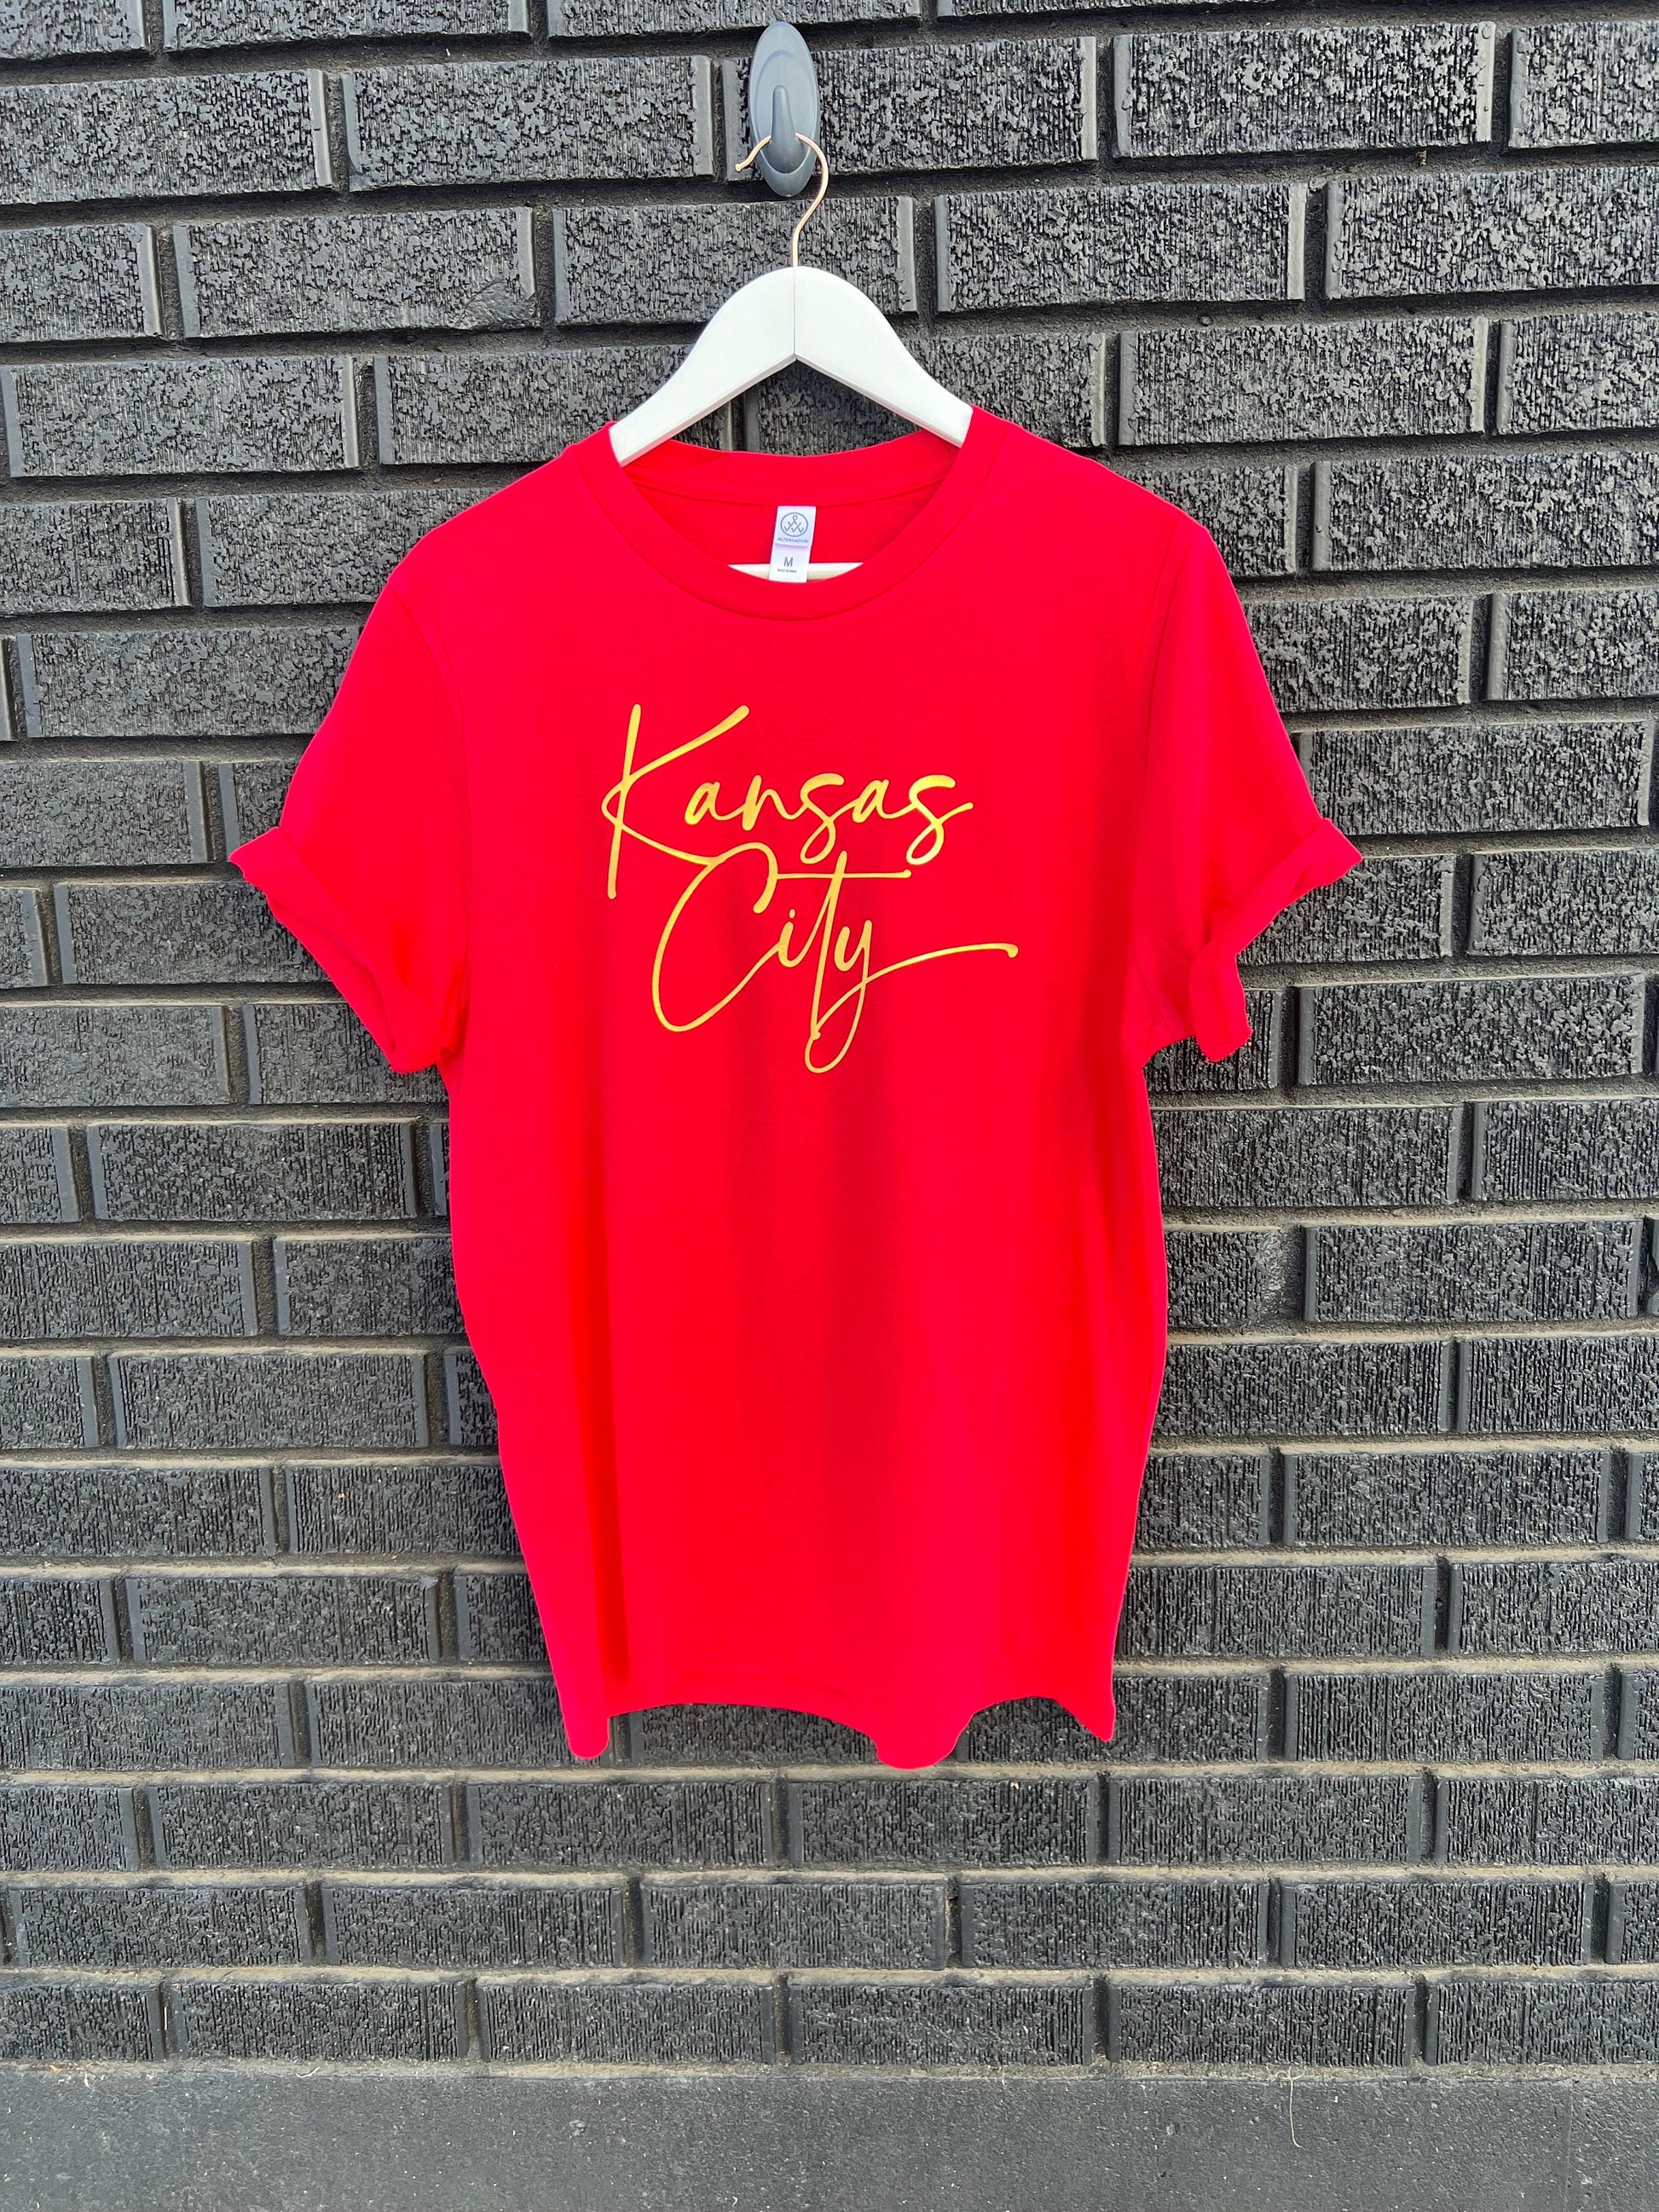 Pick Design Color Unique Signature Kansas City | Red Sweatshirt T-Shirt | Made here in KC! | Perfect for Game Day! | Soft! | Adult